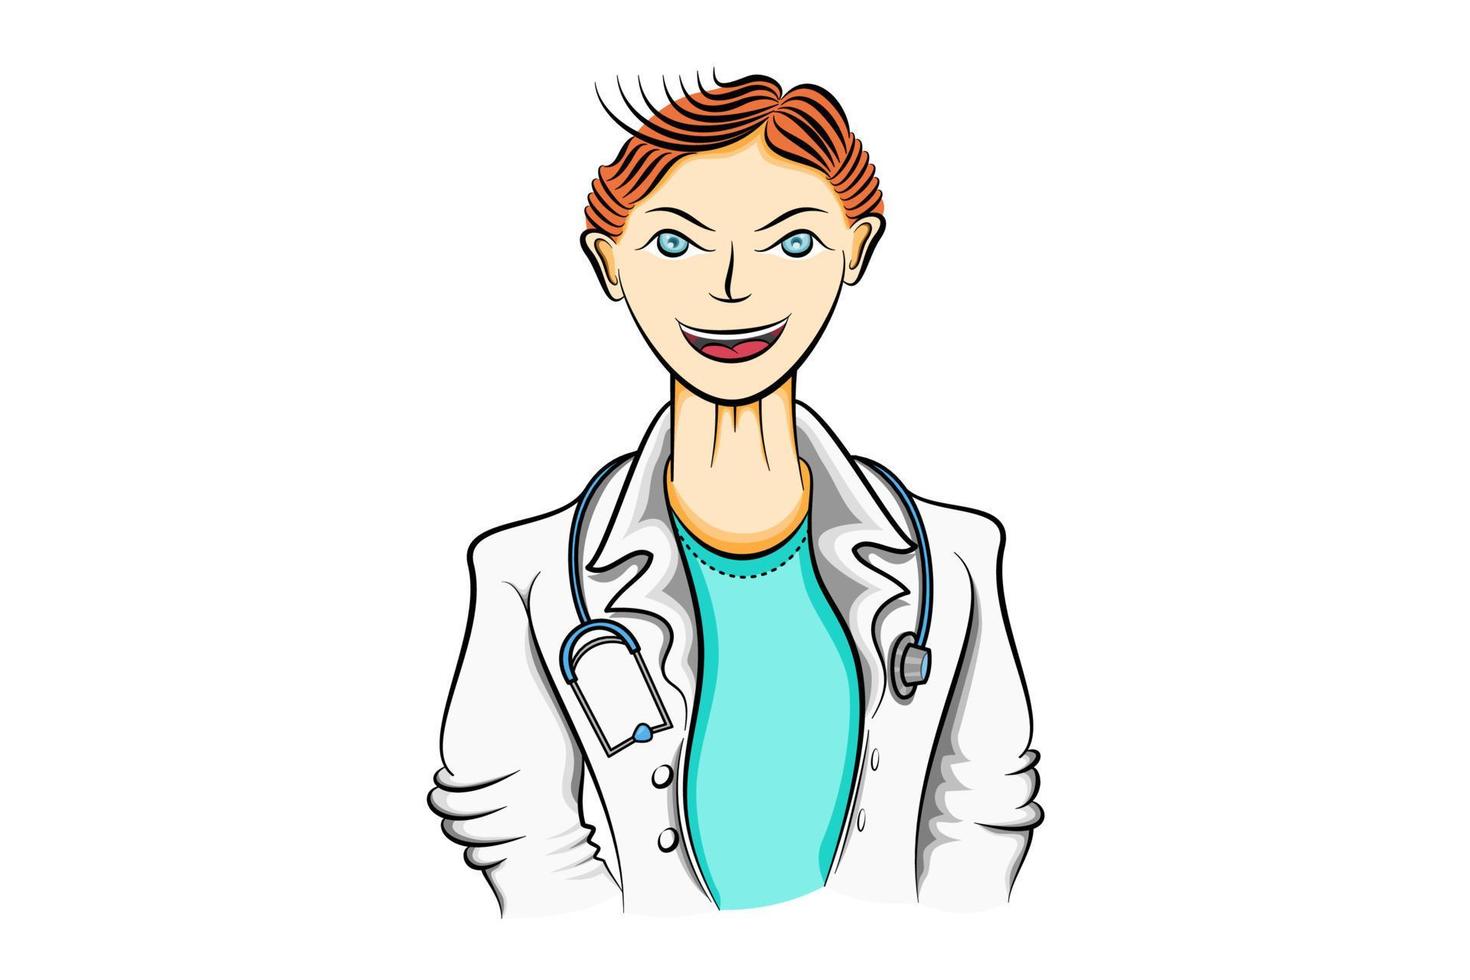 Cartoon doctor character in uniform with stethoscope on white isolated background vector